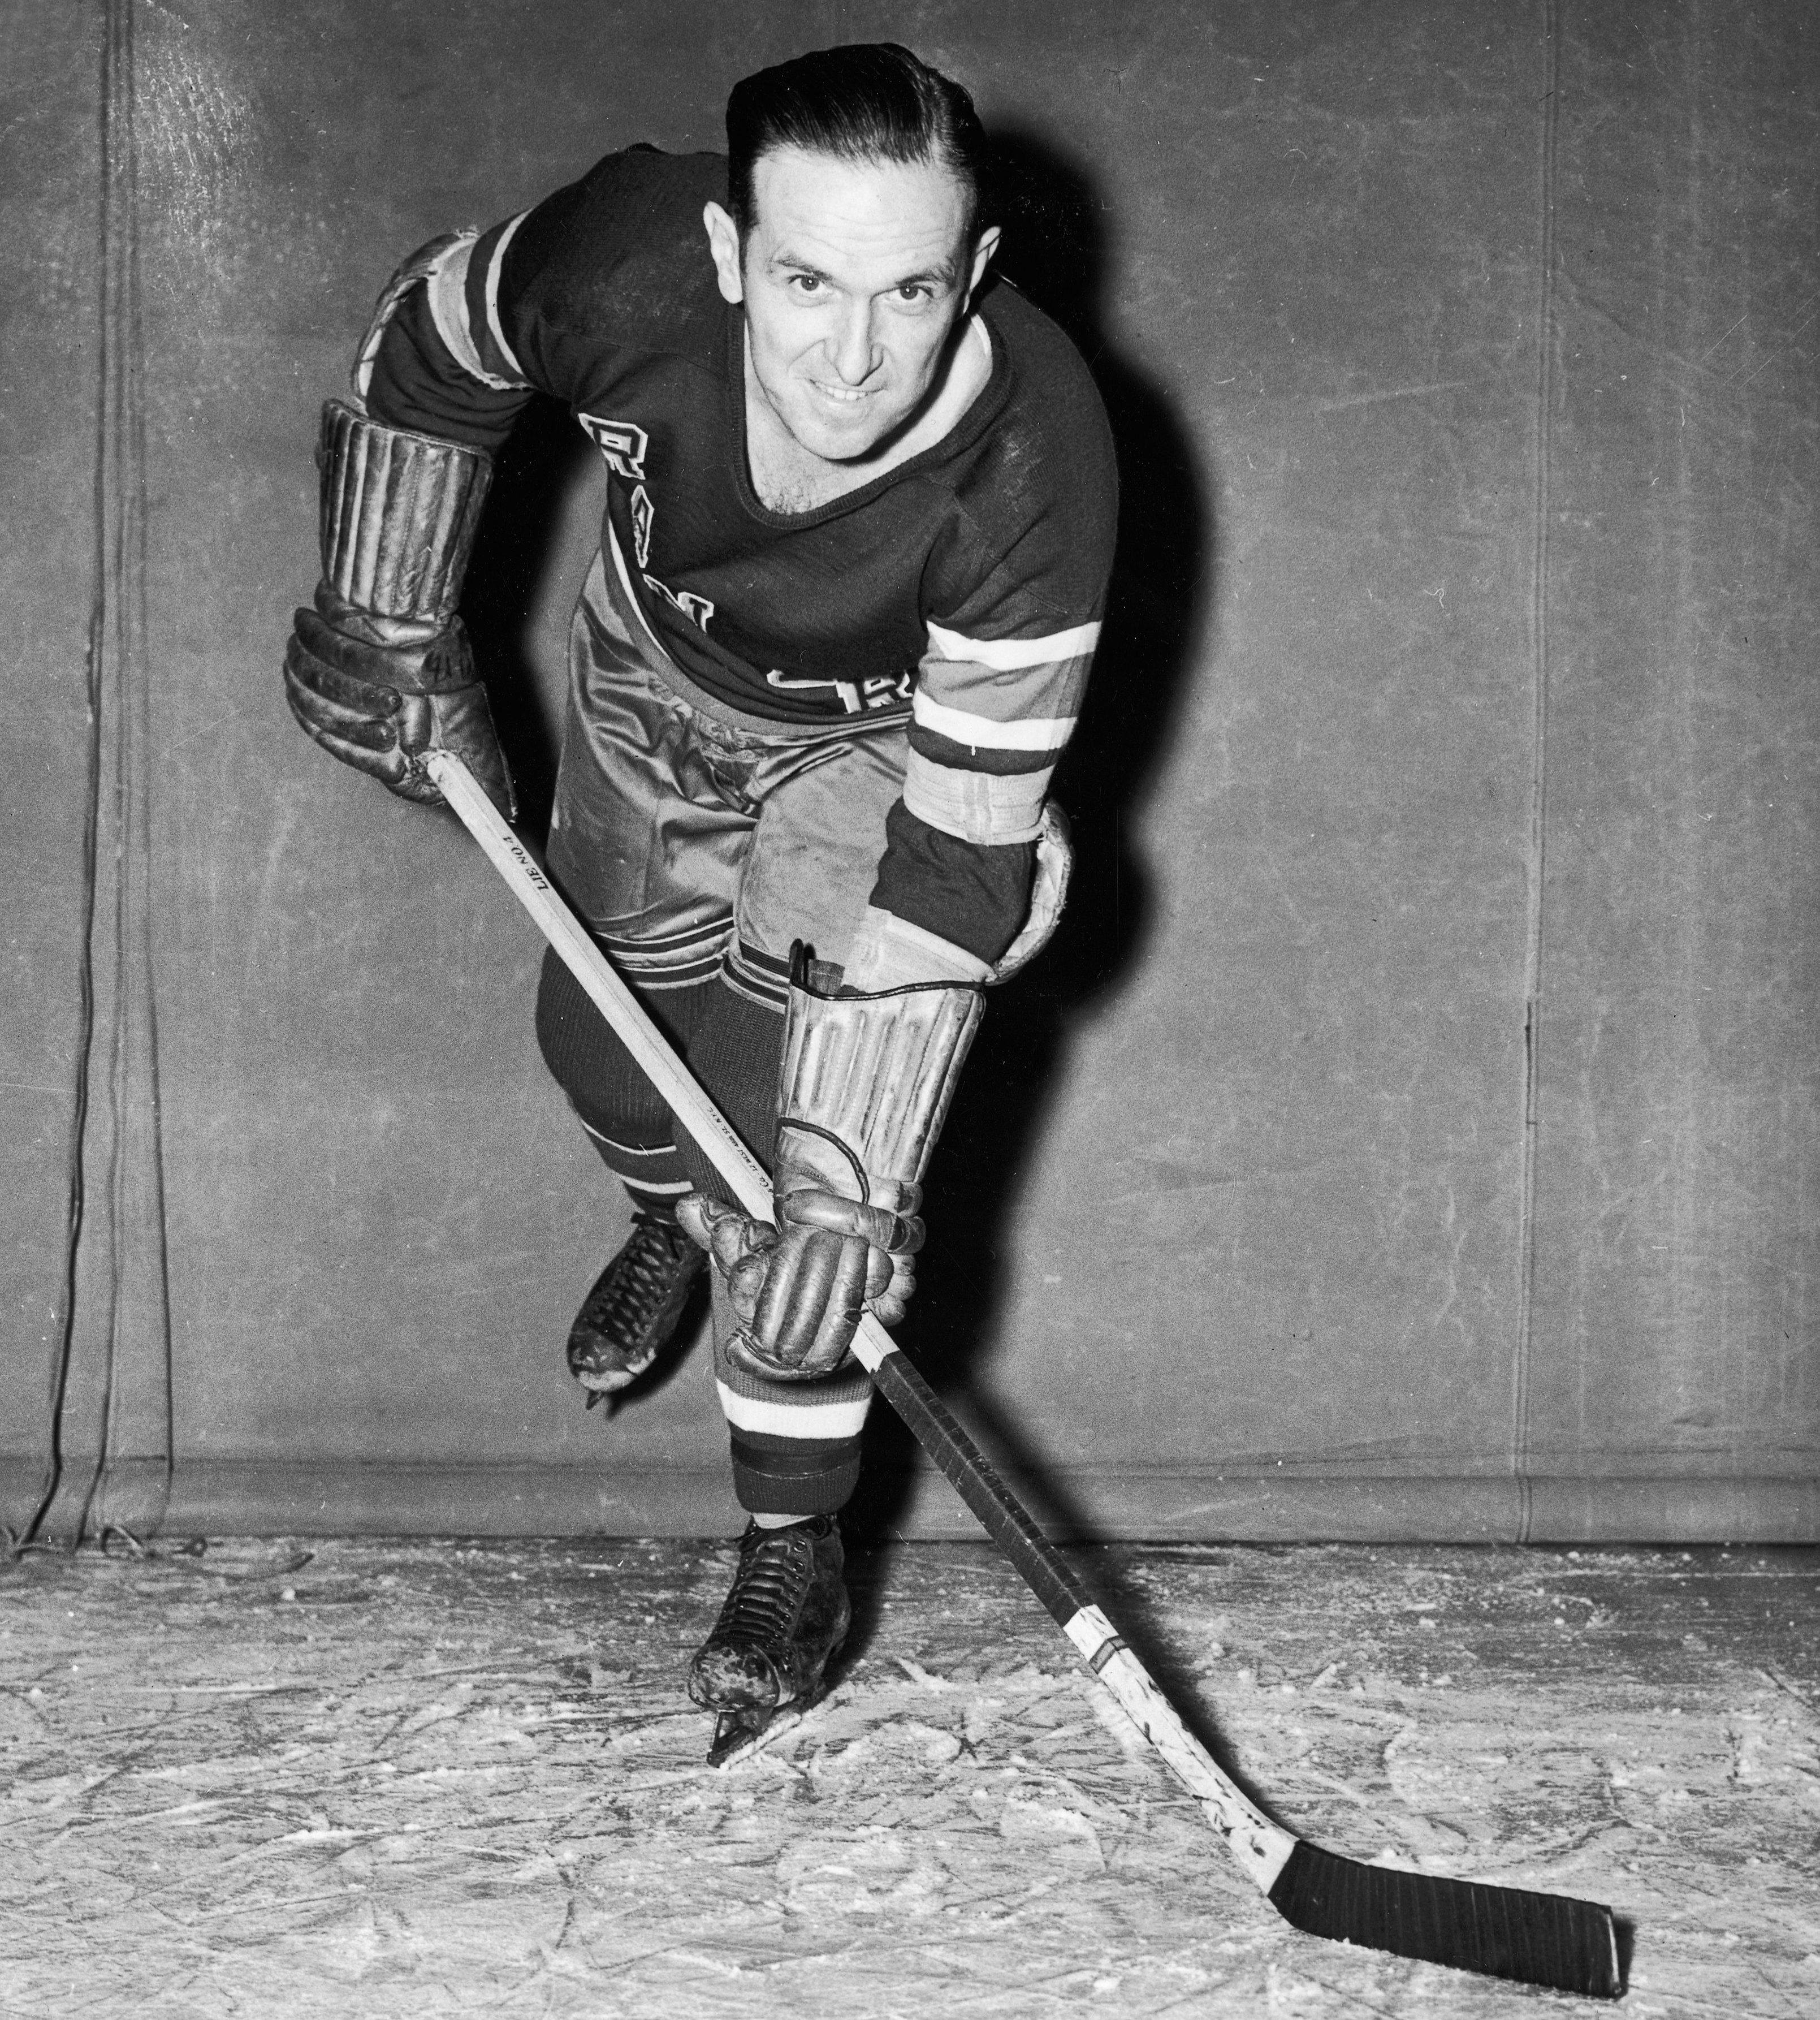 Canadian professional ice hockey player and coach Frank Boucher (1901 - 1977) of the New York Rangers practices on the ice before a game, Madison Square Garden, New York, November 11, 1943. Boucher returned to play while he was coach during World War Two because so much of the team had been drafted into the armed forces. (Photo by Bruce Bennett Studios/Getty Images)